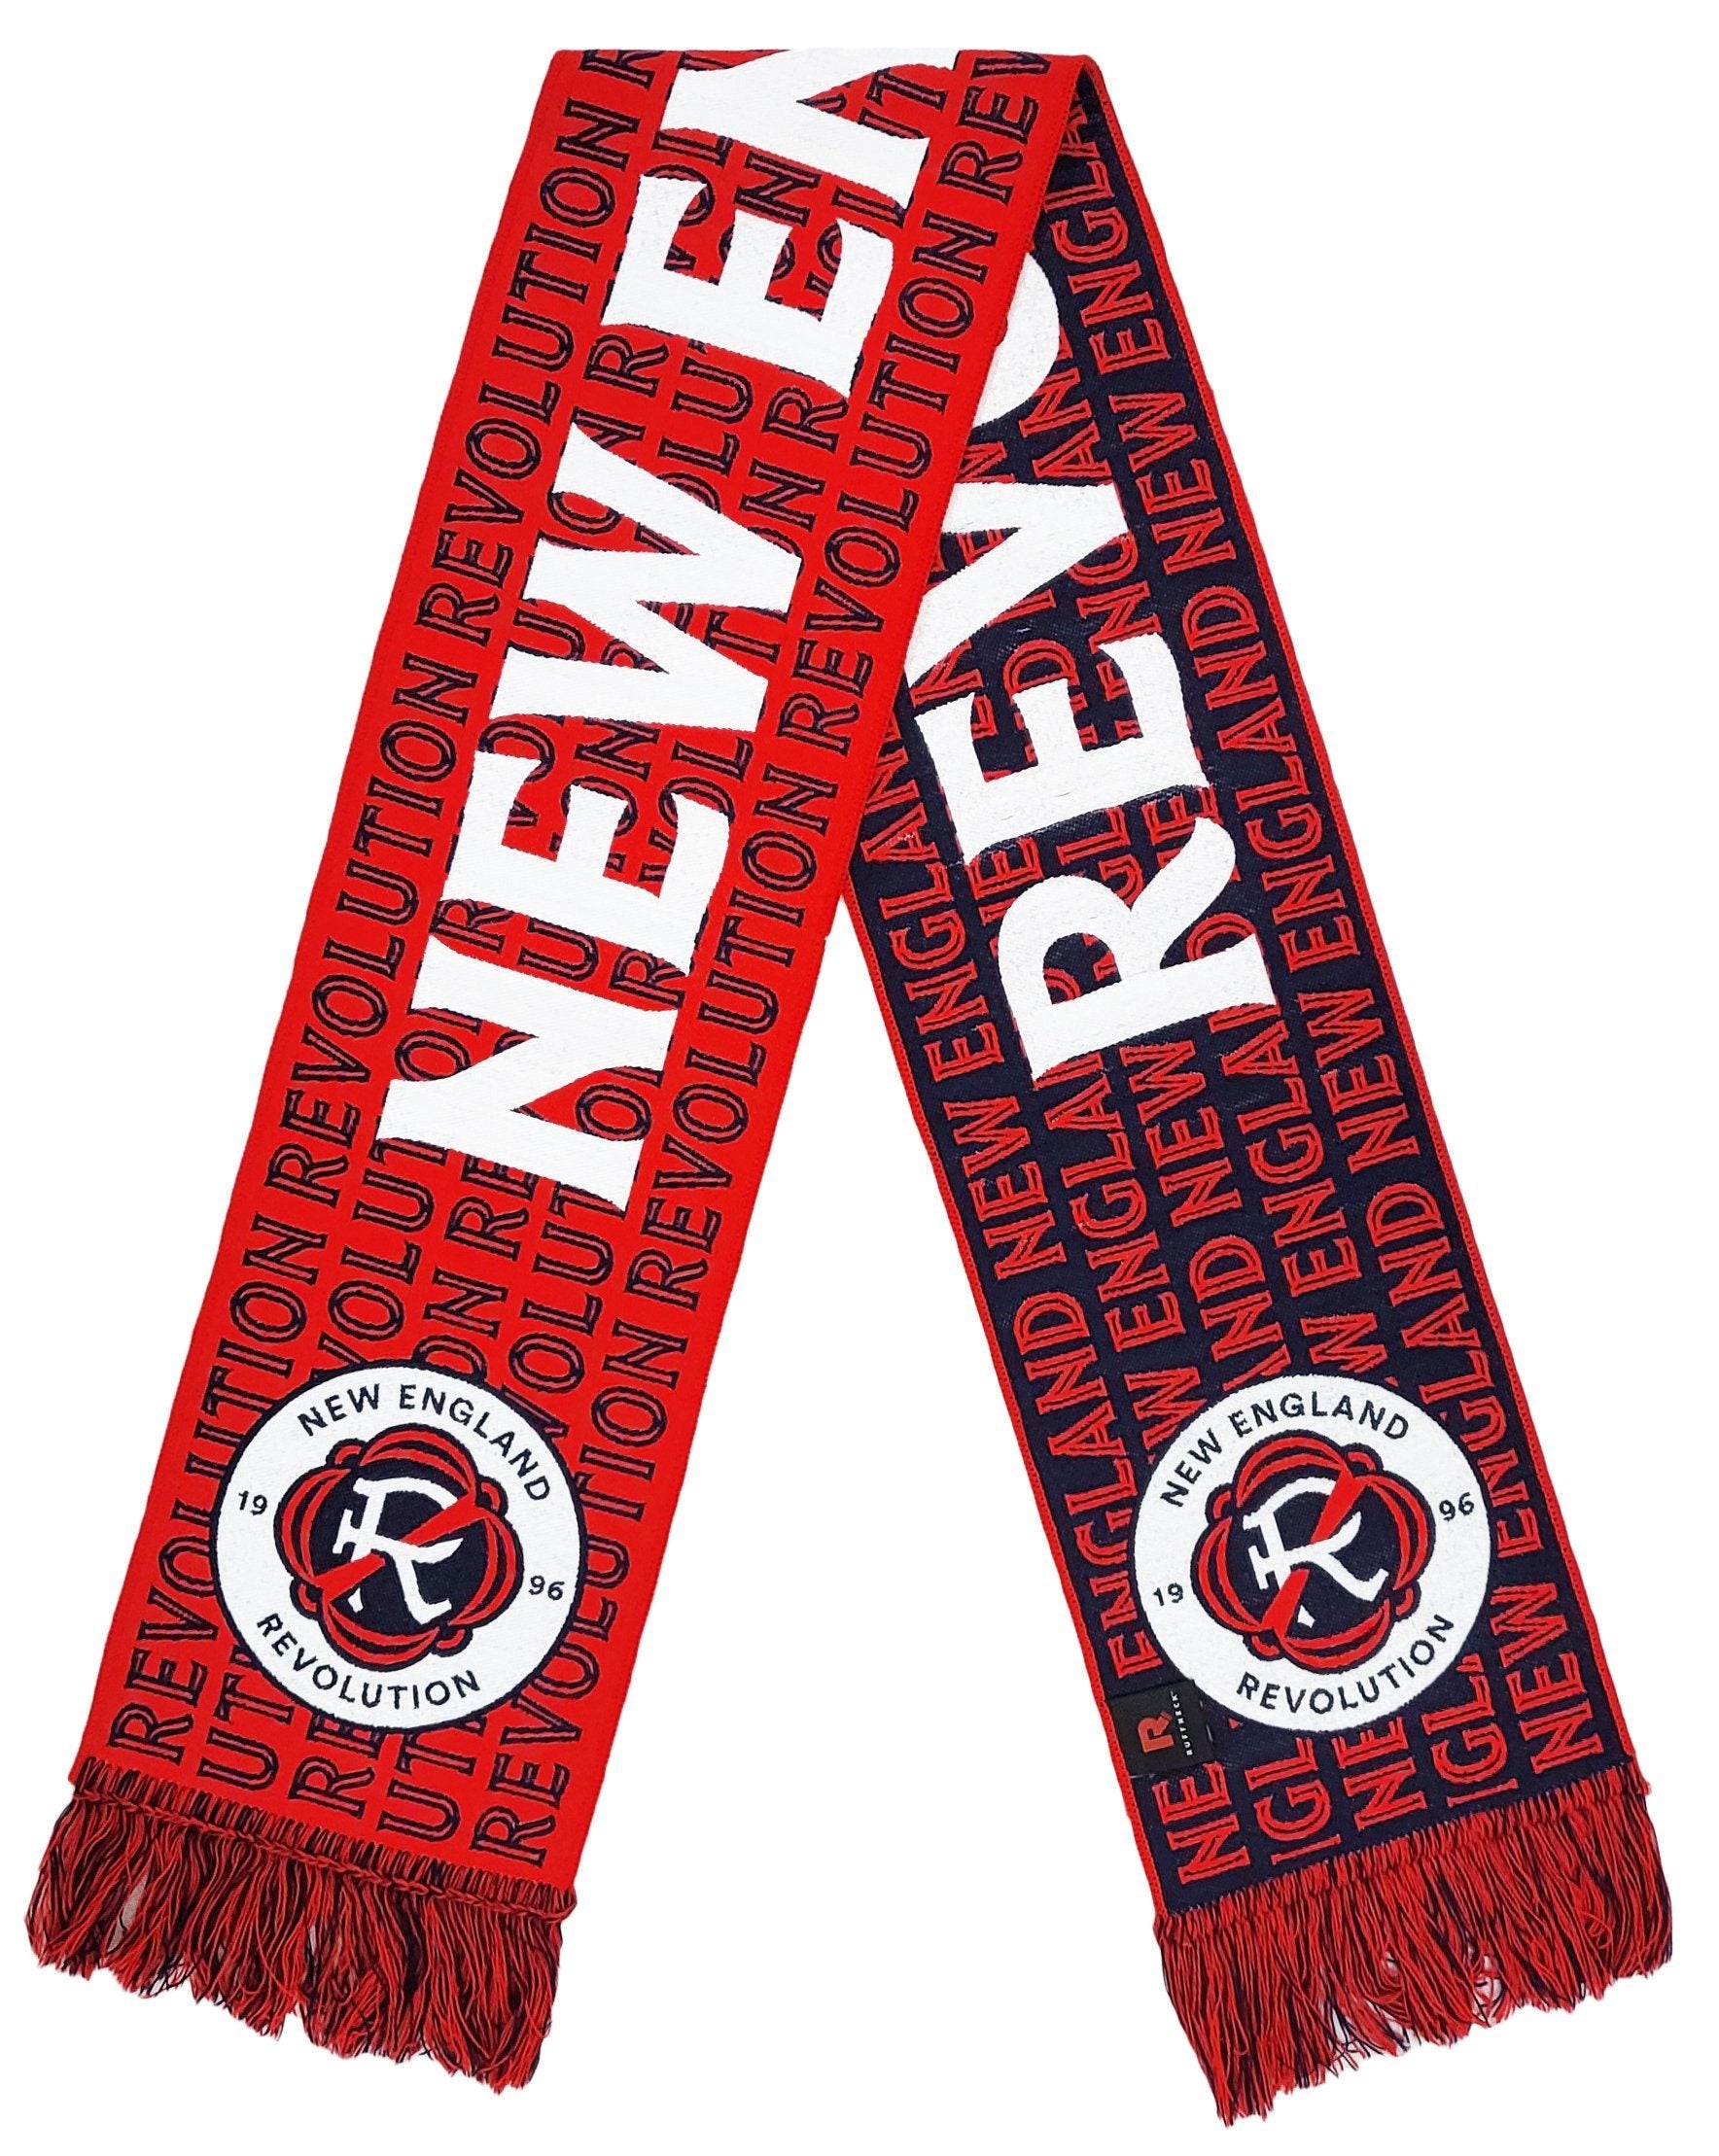 NEW ENGLAND REVOLUTION SCARF - Scroll (HD Woven) – Ruffneck Scarves